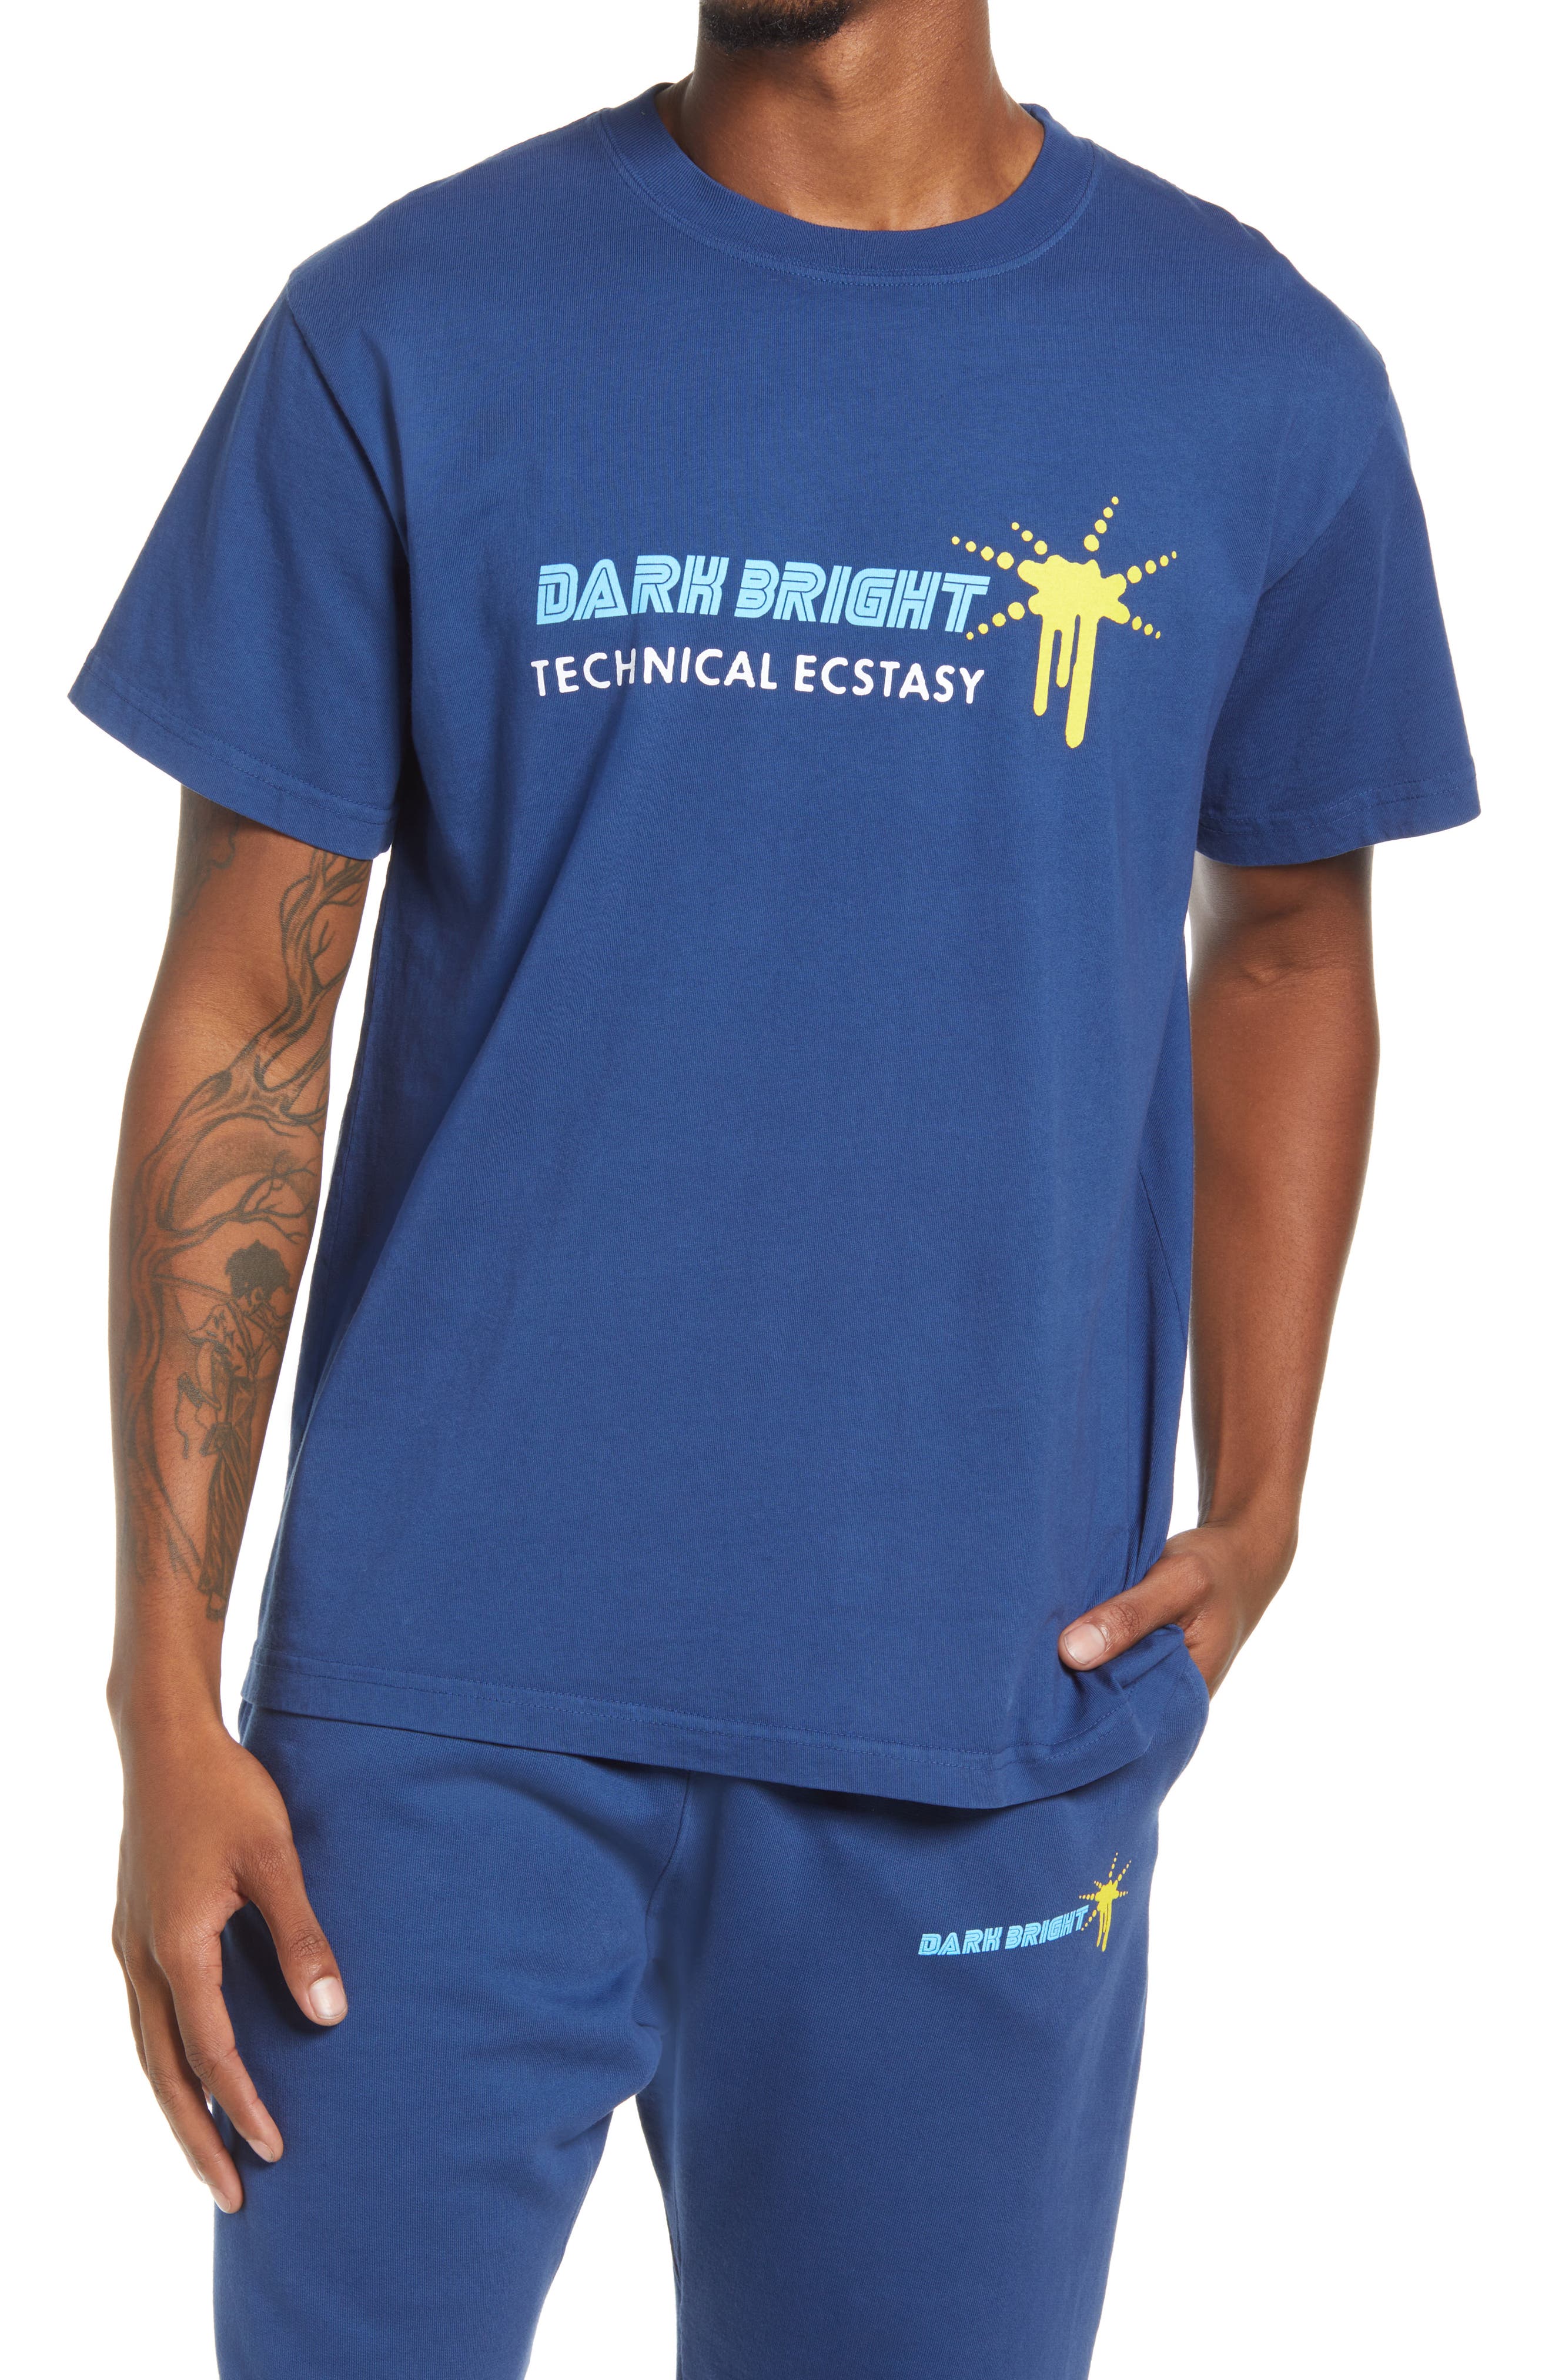 DARKBRIGHT Technical Ecstasy Graphic Tee in Blue at Nordstrom